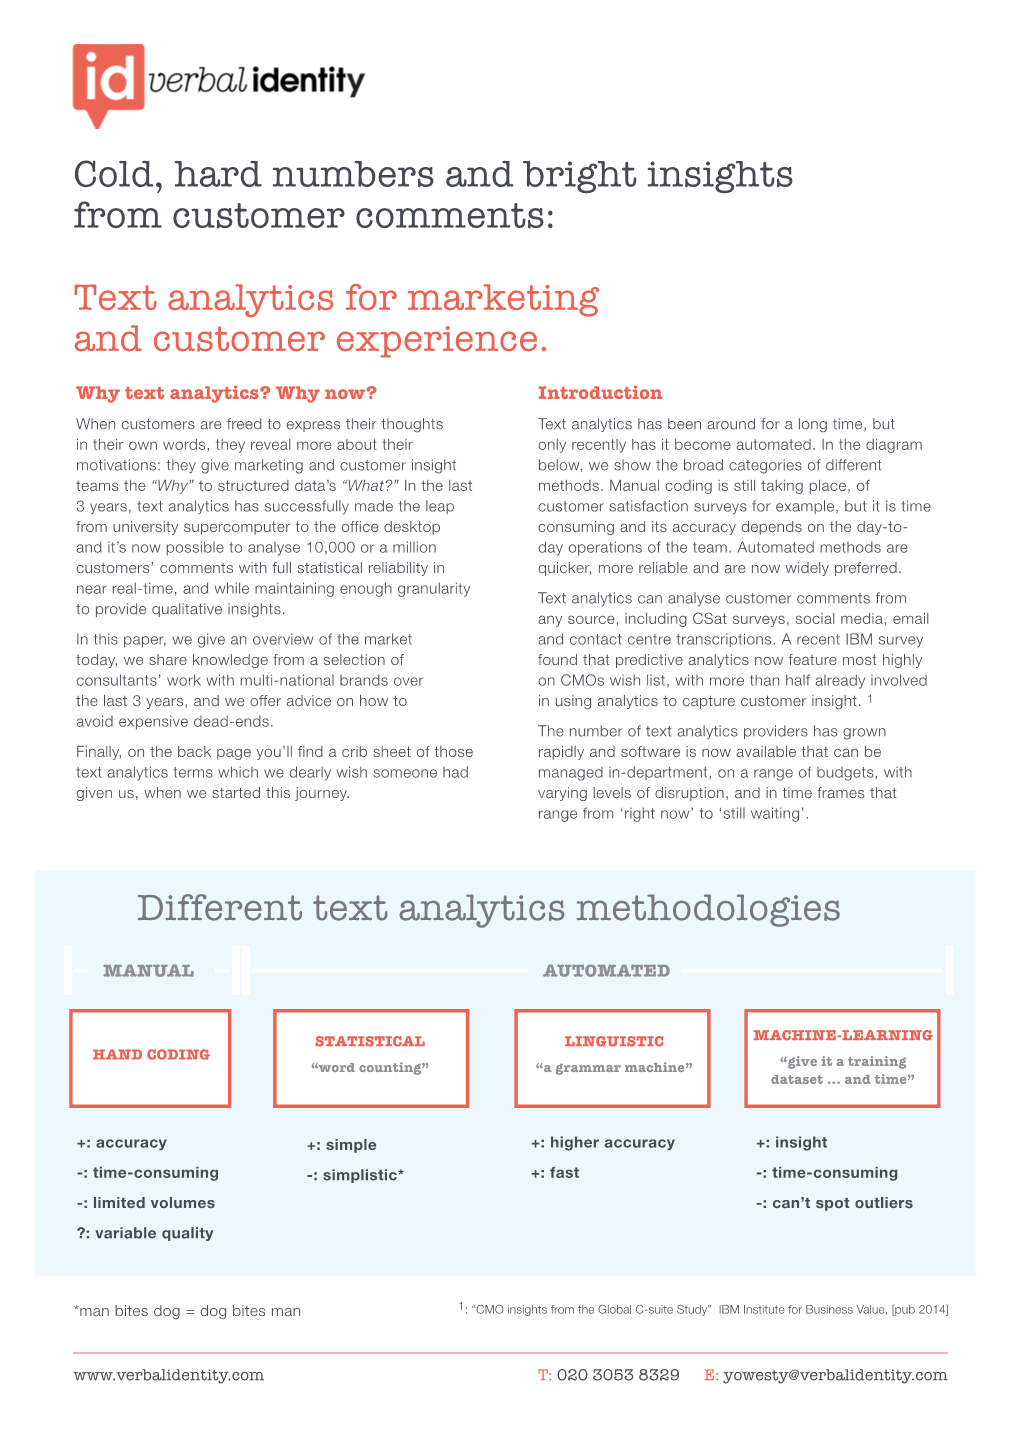 Text Analytics for Marketing and Customer Experience